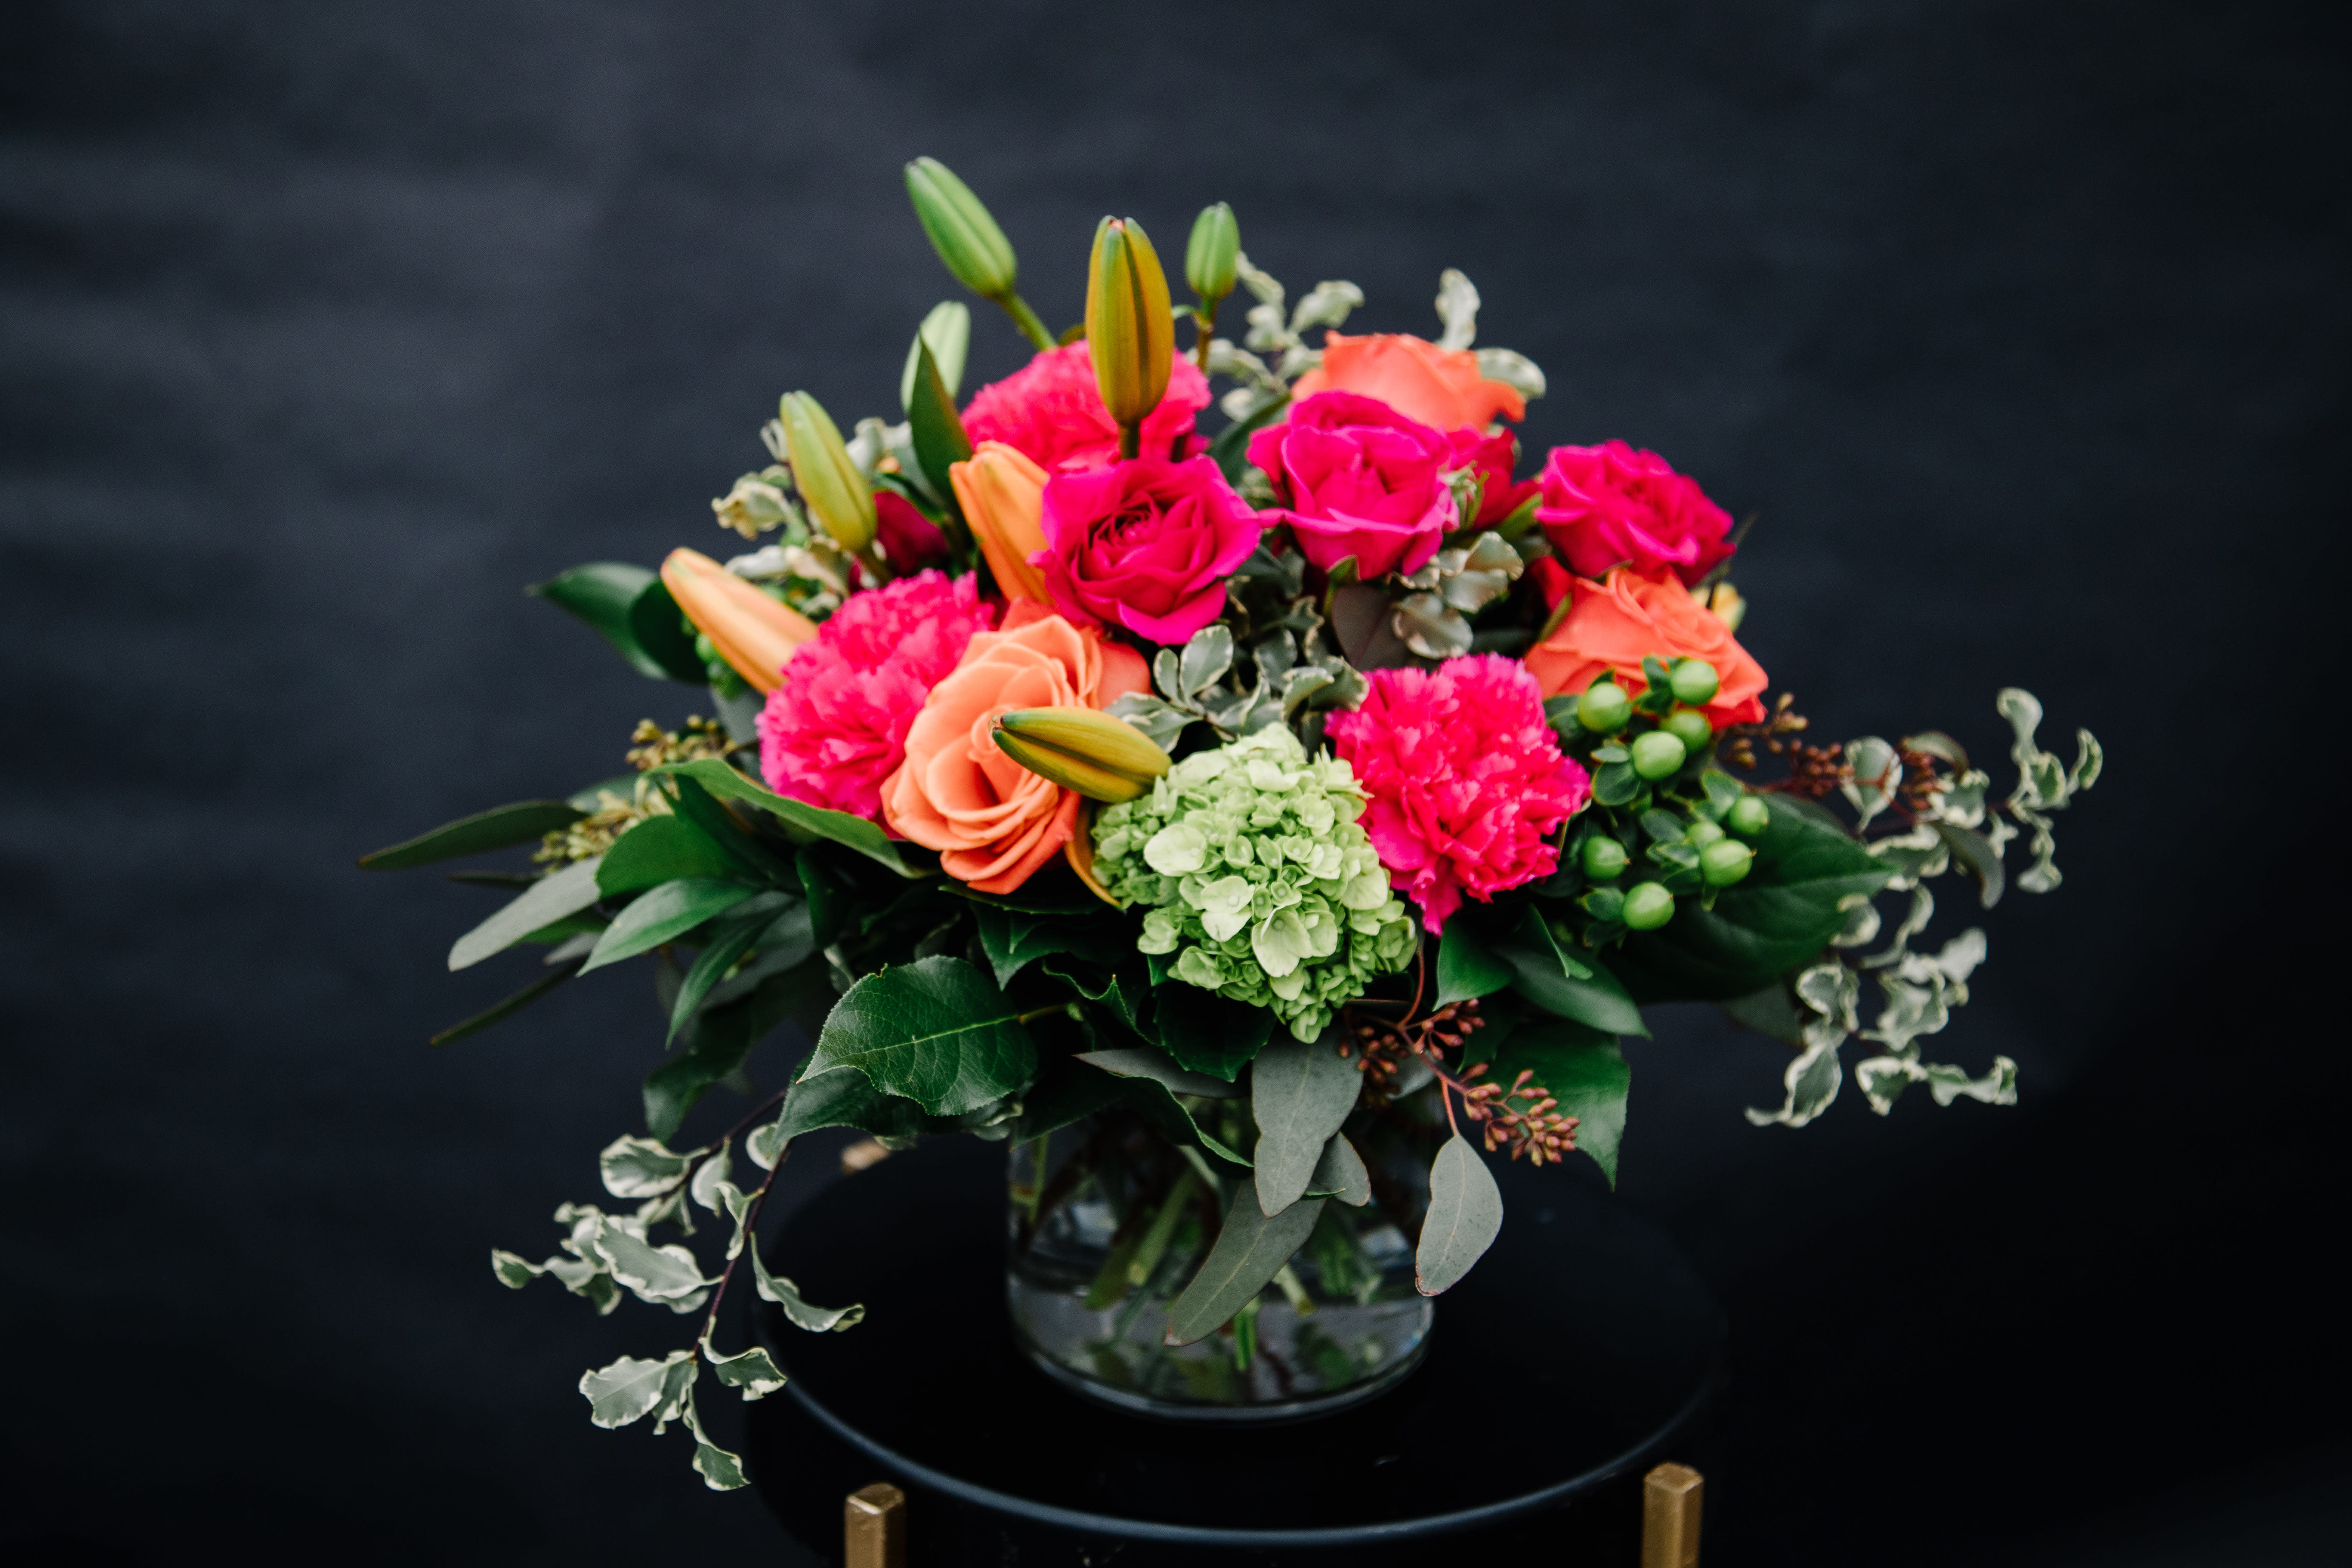 Vibrant Love - Our dazzling vibrant bouquet of love is a prefect way to celebrate a rare gem in your life.  Rich pink and orange blooms come together with bright green creating a beautiful medley of color.  Designed all around in a low modern cylinder with accents of seeded eucalyptus.